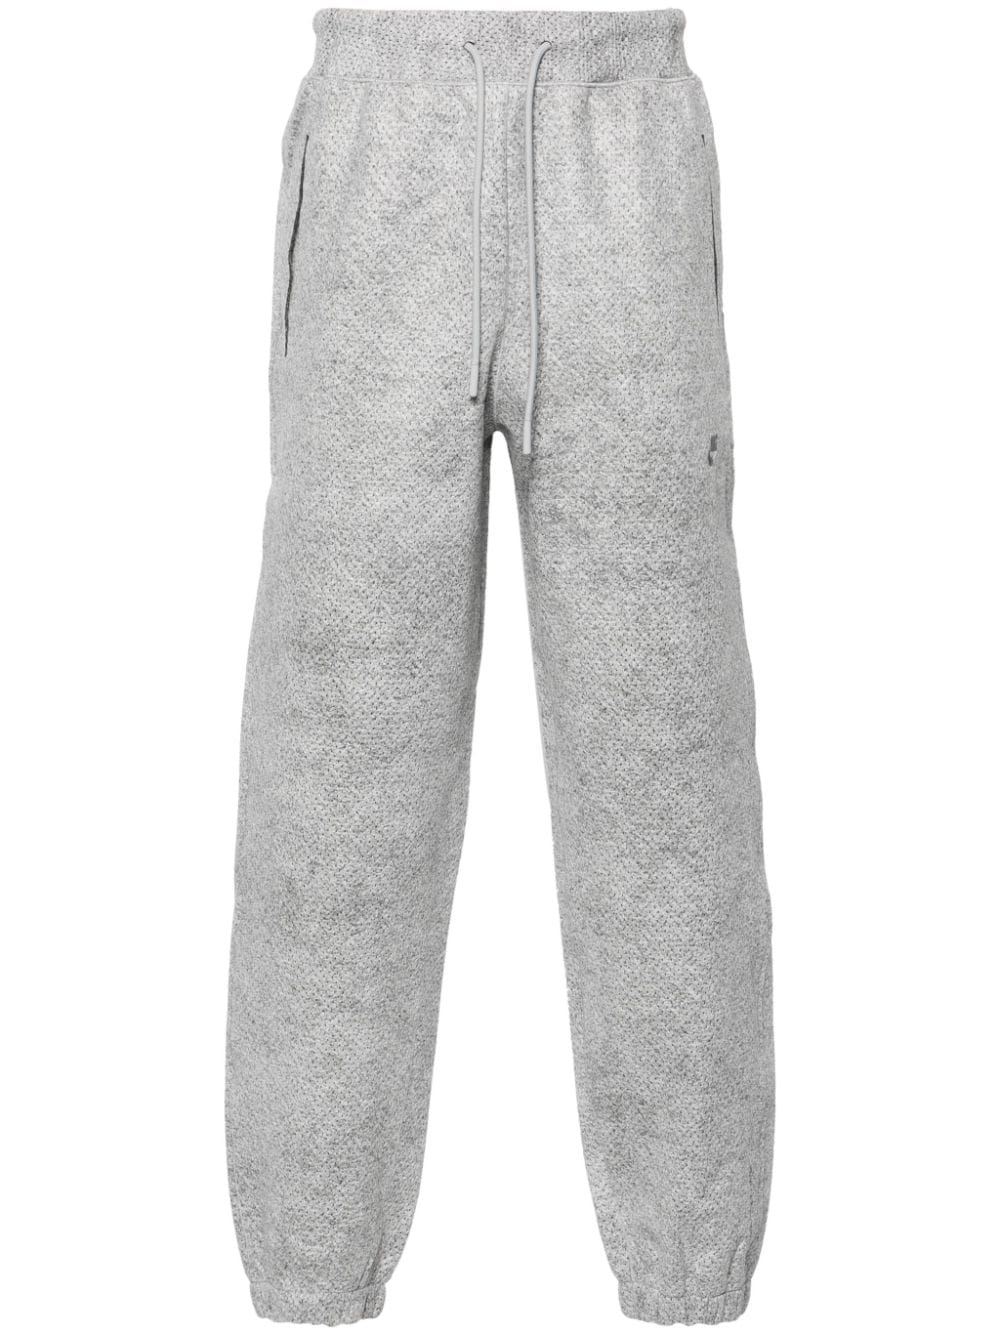 Nike Therma-FIT ADV track trousers - Grey von Nike